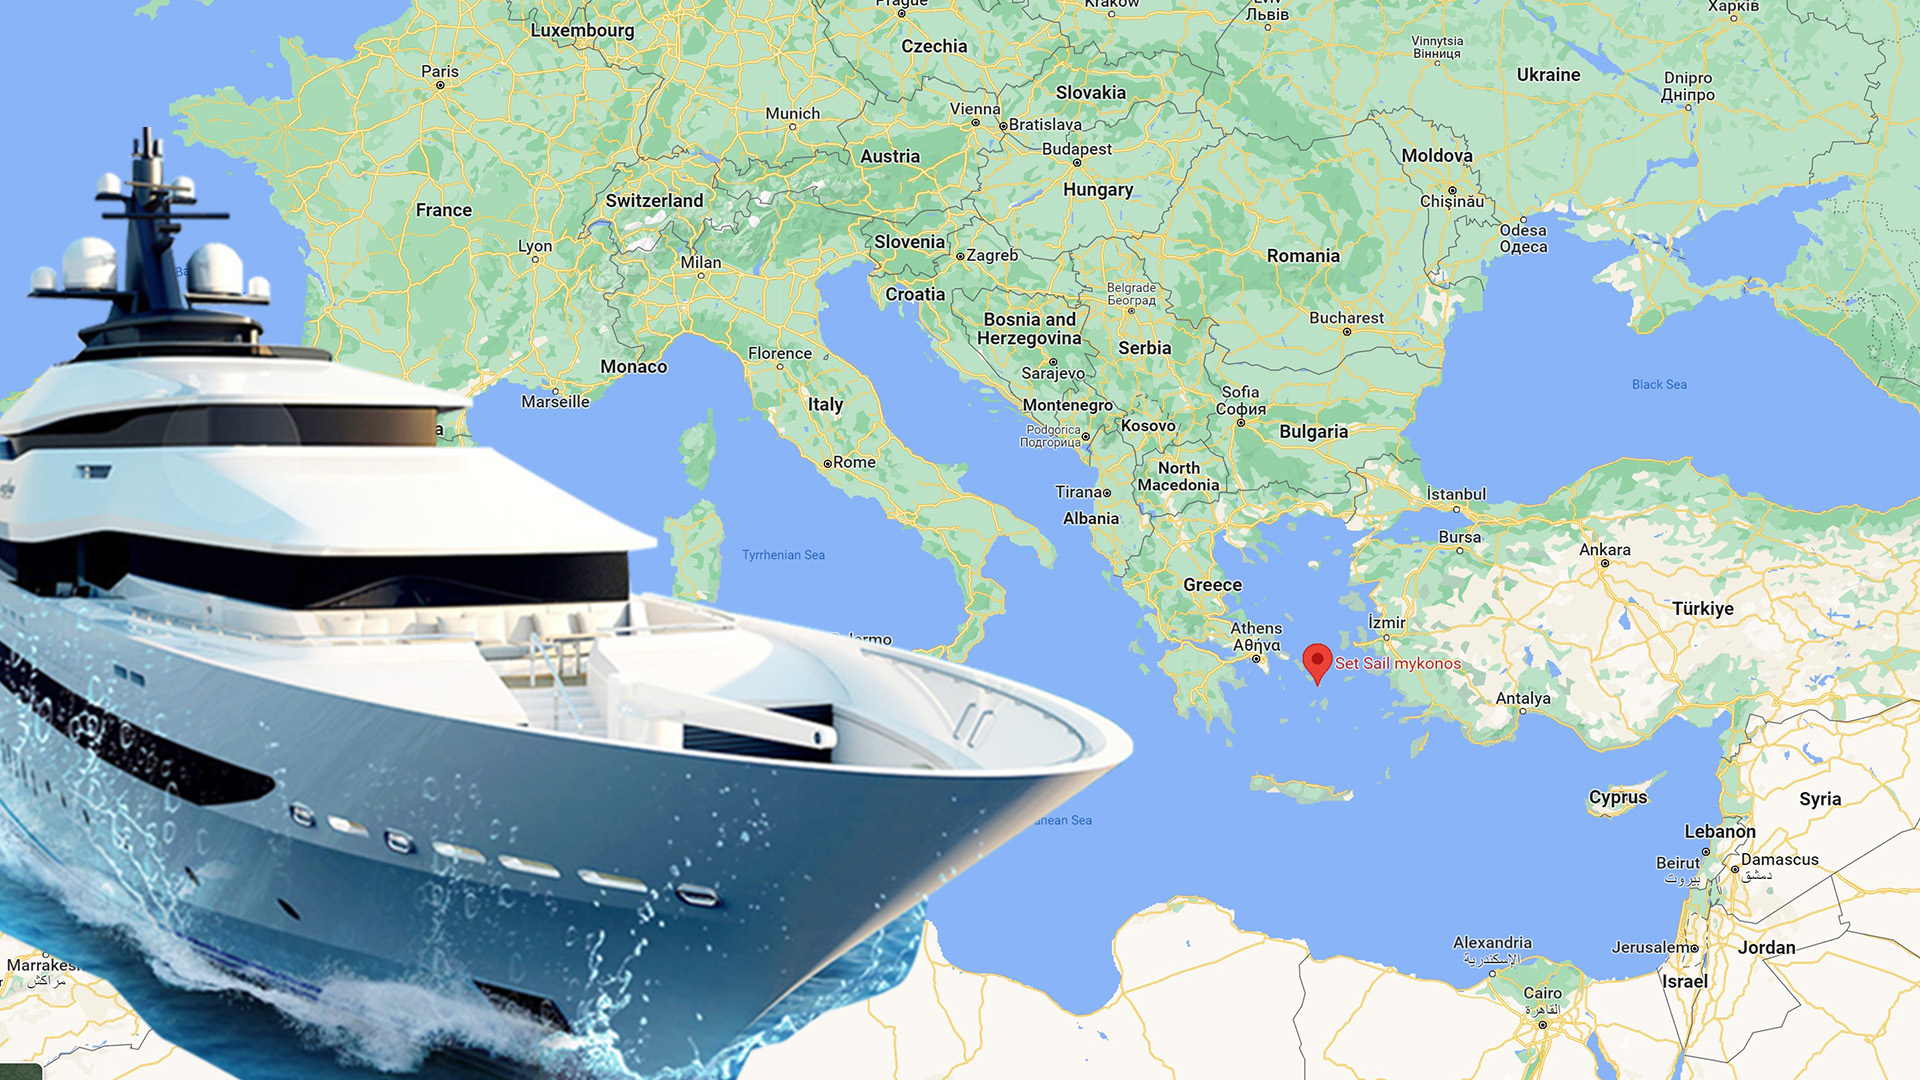 How Long Would it Take to Travel by Yacht from Cannes, France to Mykonos?